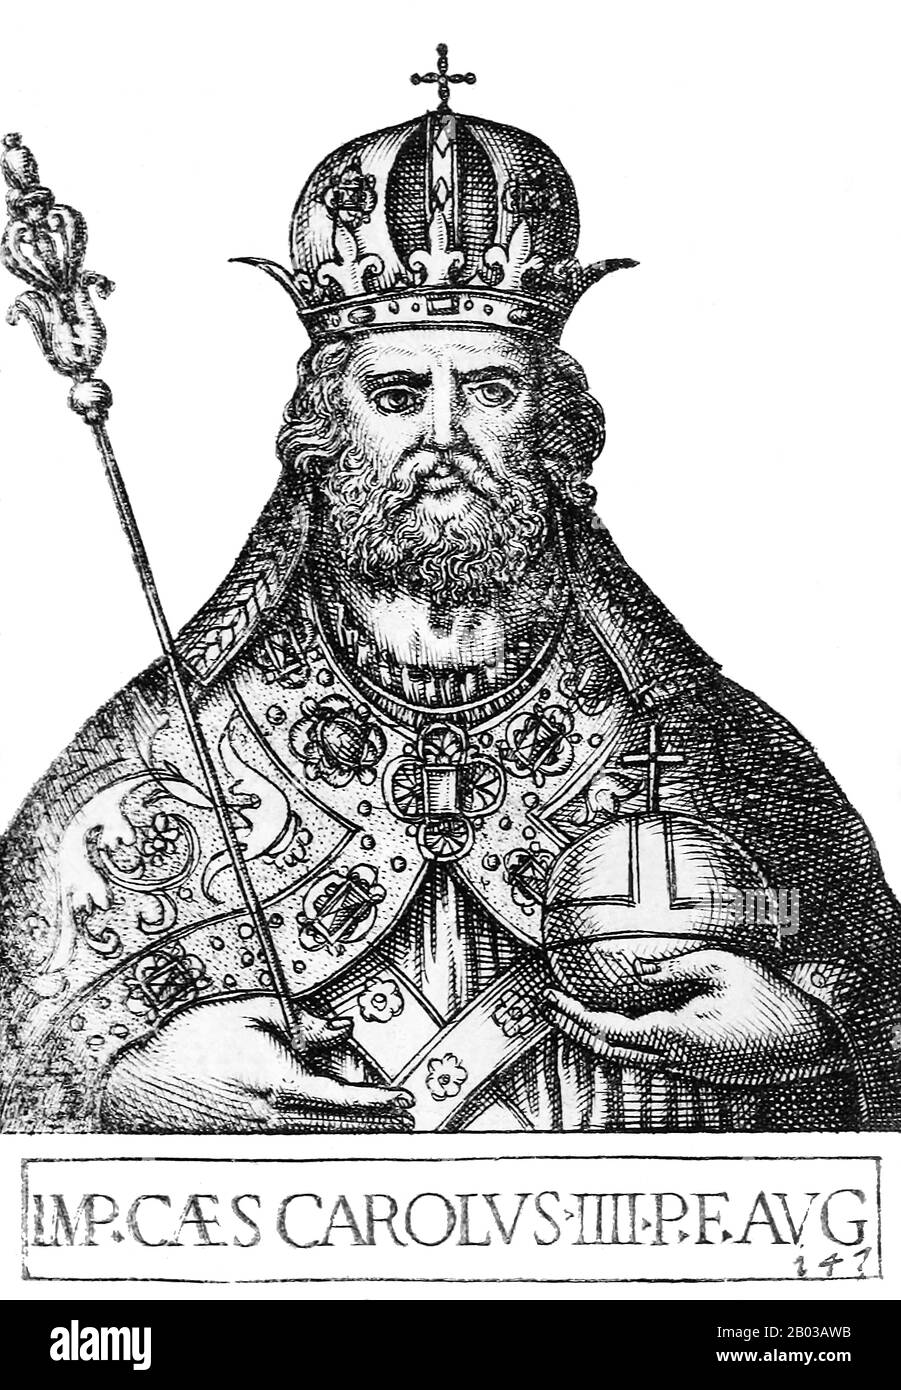 Charles IV (1316-1378), born Wenceslaus, was the eldest son of King John of Bohemia and grandson of Emperor Henry VII, making him part of the Luxembourg dynasty. Charles was crowned King of Italy and Holy Roman Emperor in 1355, and later became King of Burgundy in 1365, making him the personal ruler of all the kingdoms of the Holy Roman Empire. Stock Photo